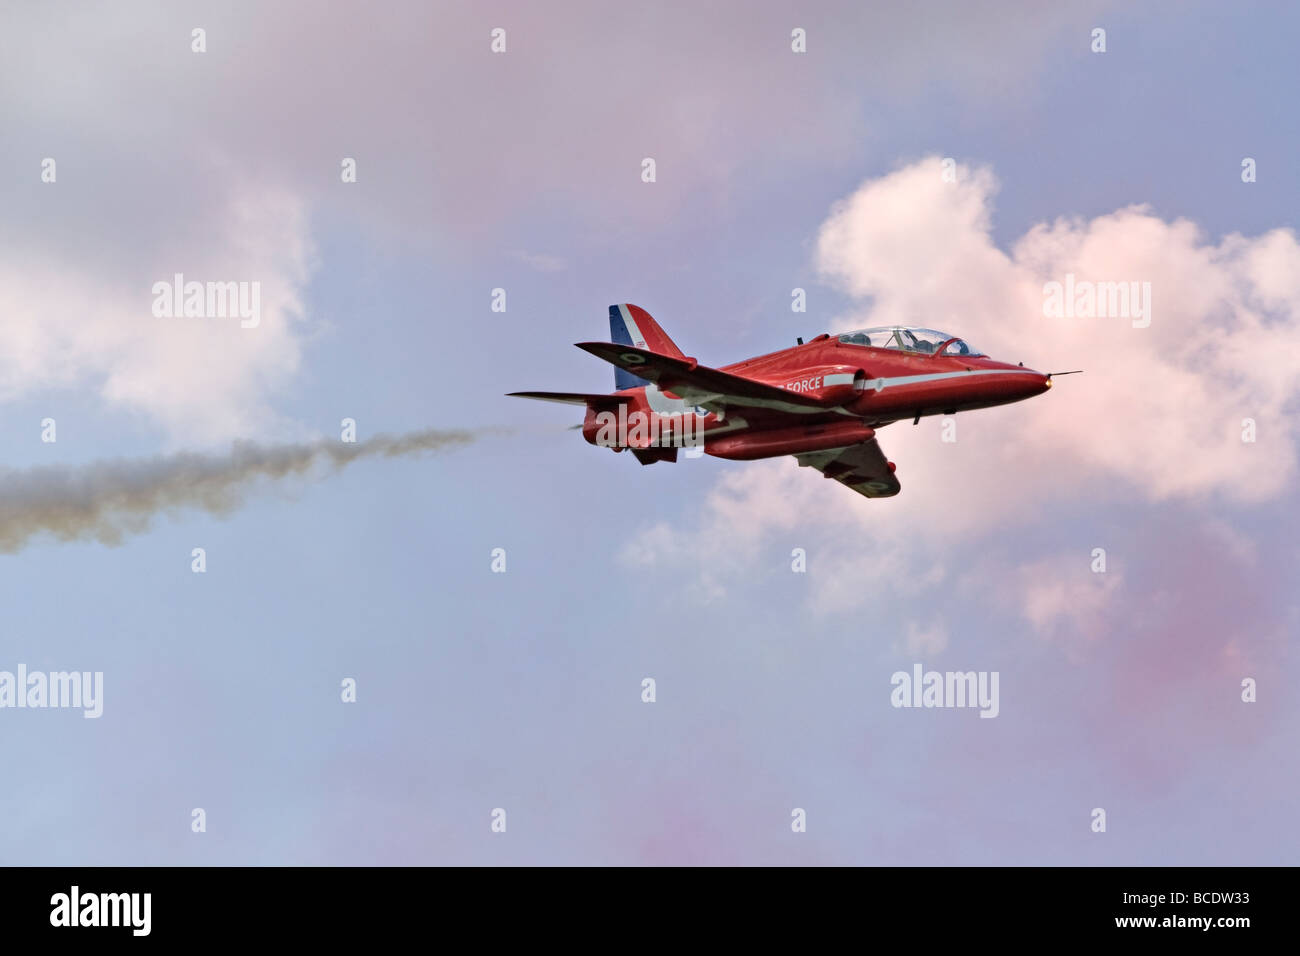 A BAE Hawk aircraft, part of 'The Red Arrows' display team, at Biggin Hill, Kent, England. Stock Photo